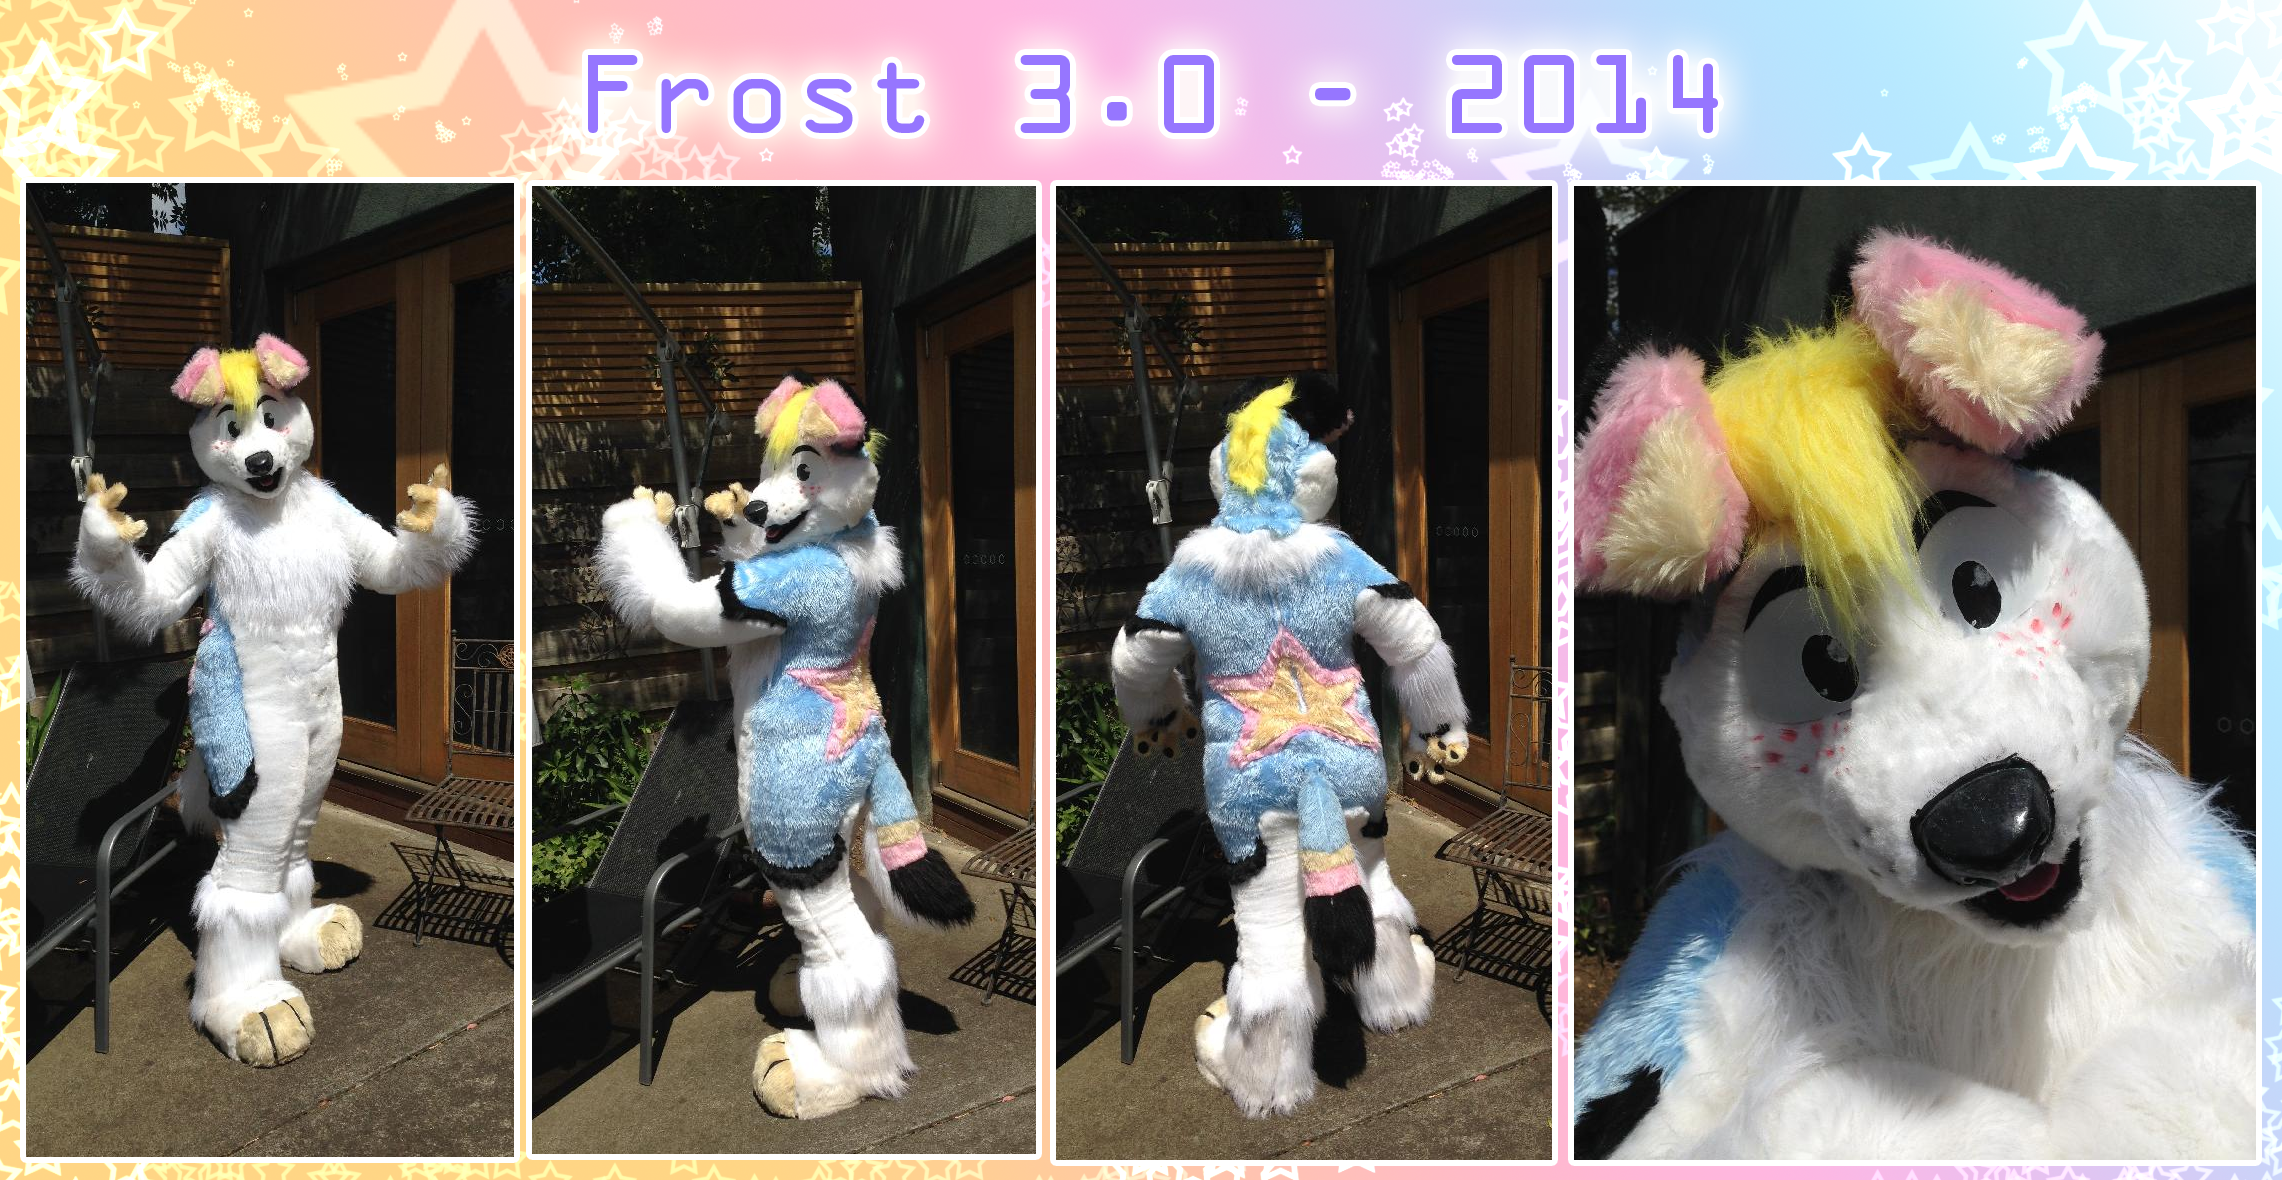 FROST FURSUIT 2014 by Frosted Monster on